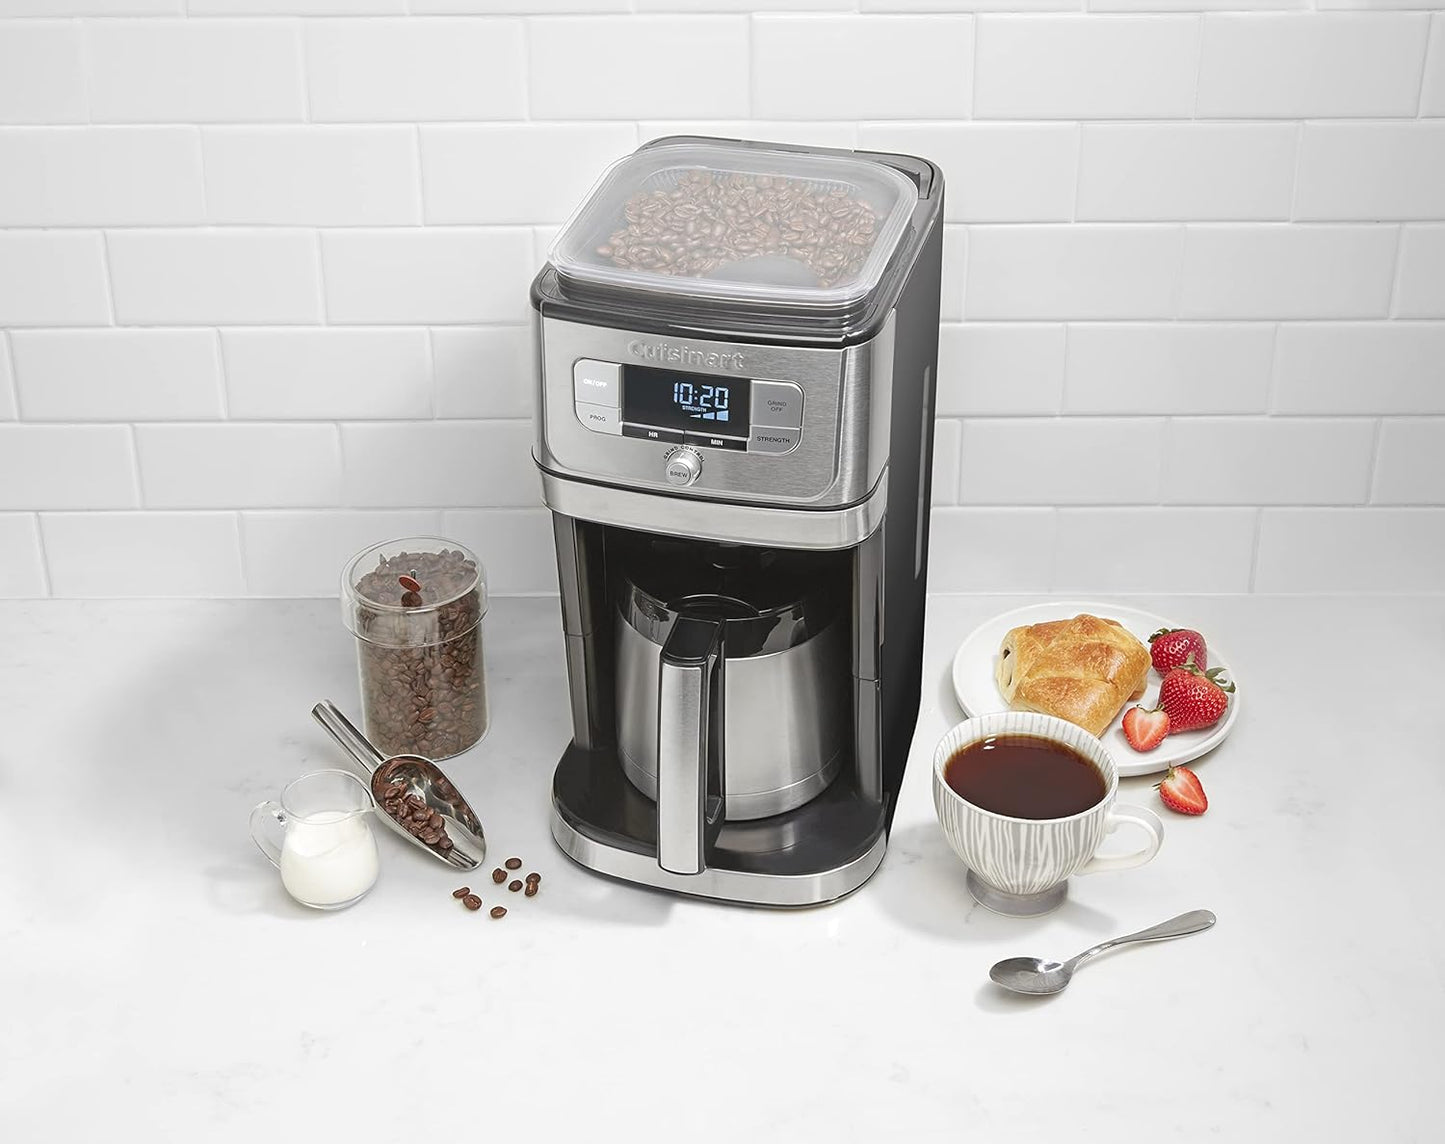 Cuisinart DGB-850 Burr Grind & Brew 10-Cup Coffeemaker with Thermal Carafe, Black/Stainless Steel, Silver